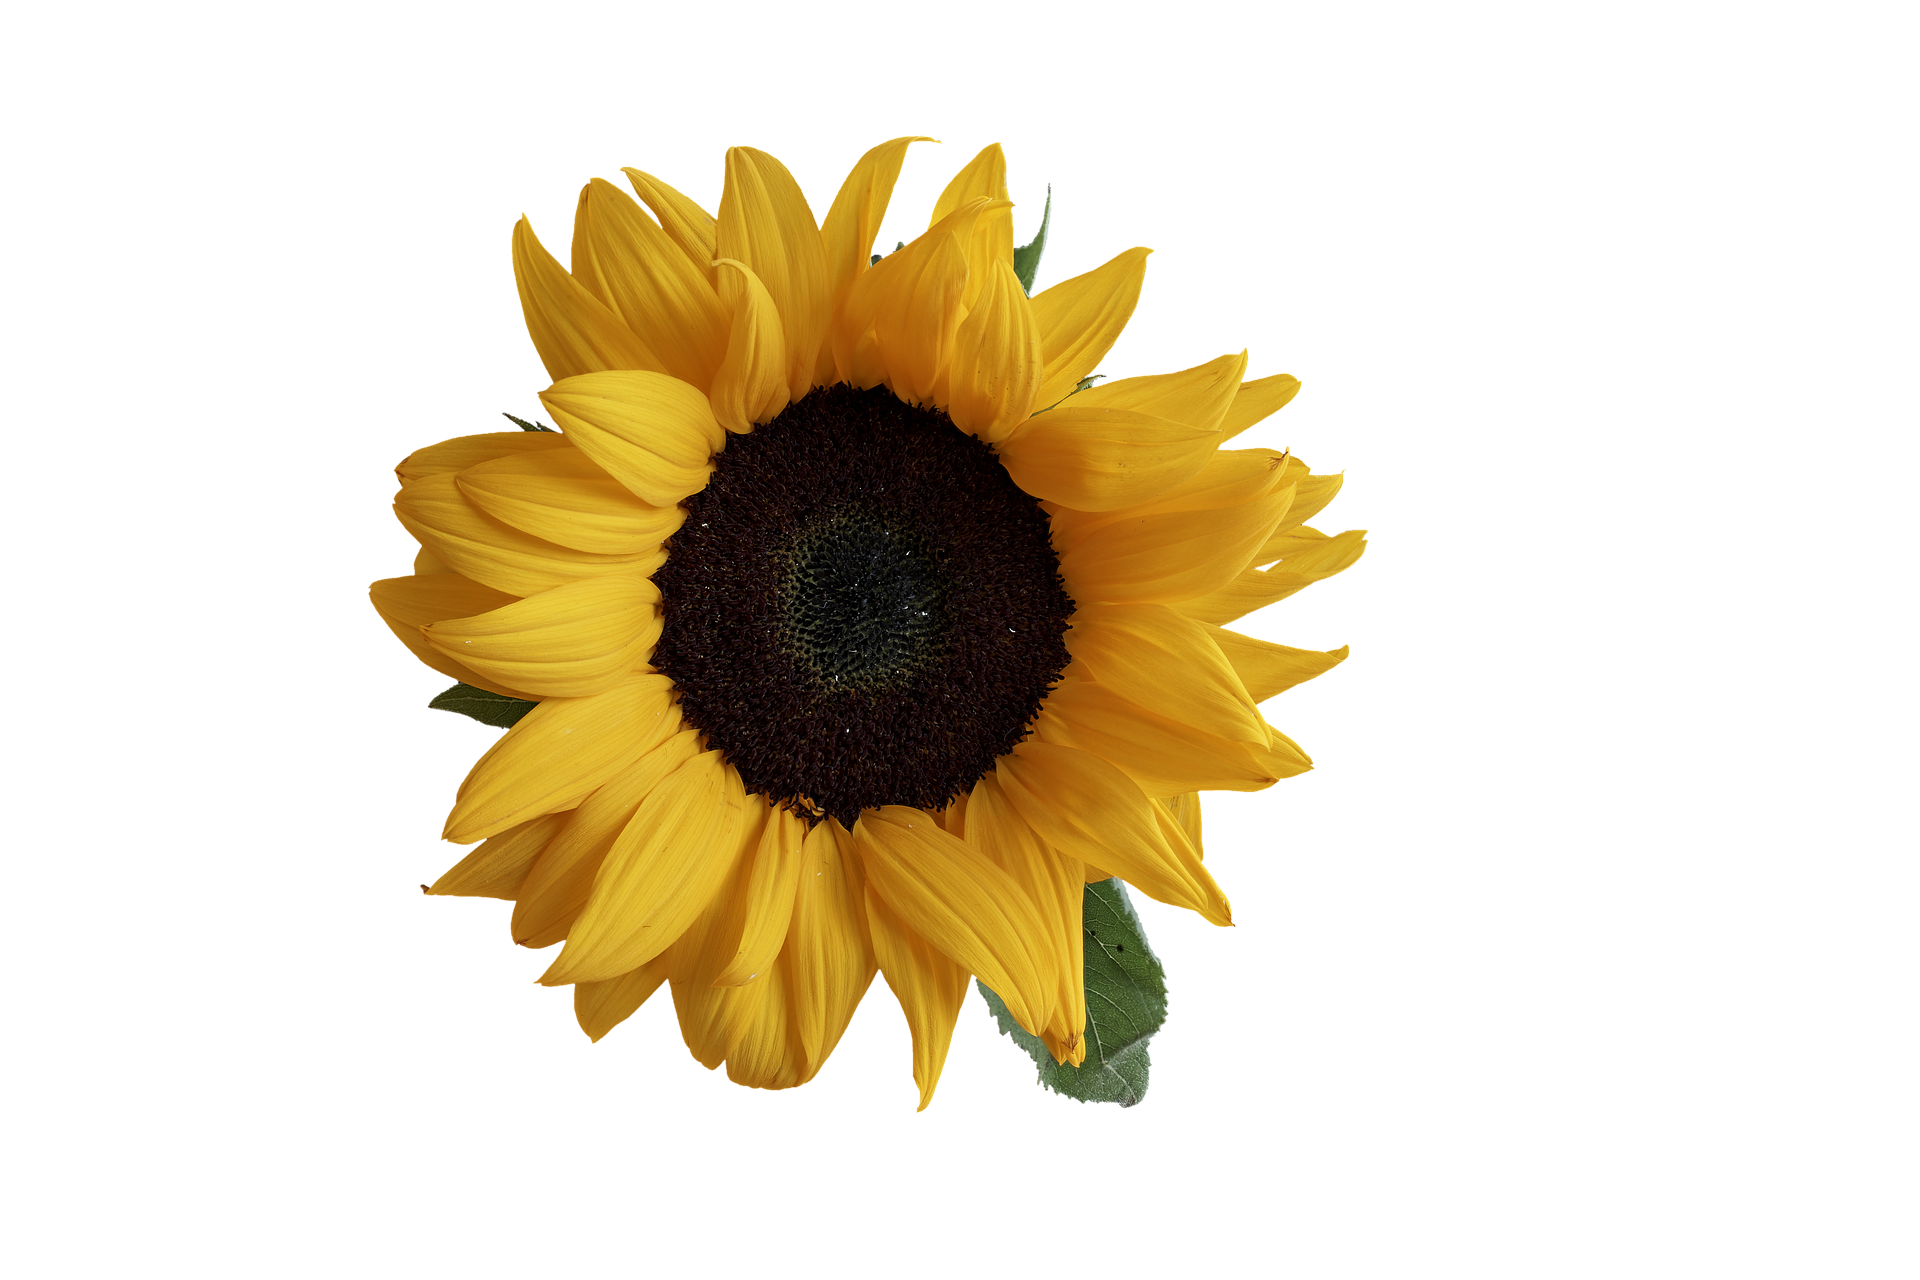 A Yellow Sunflower With Green Leaves